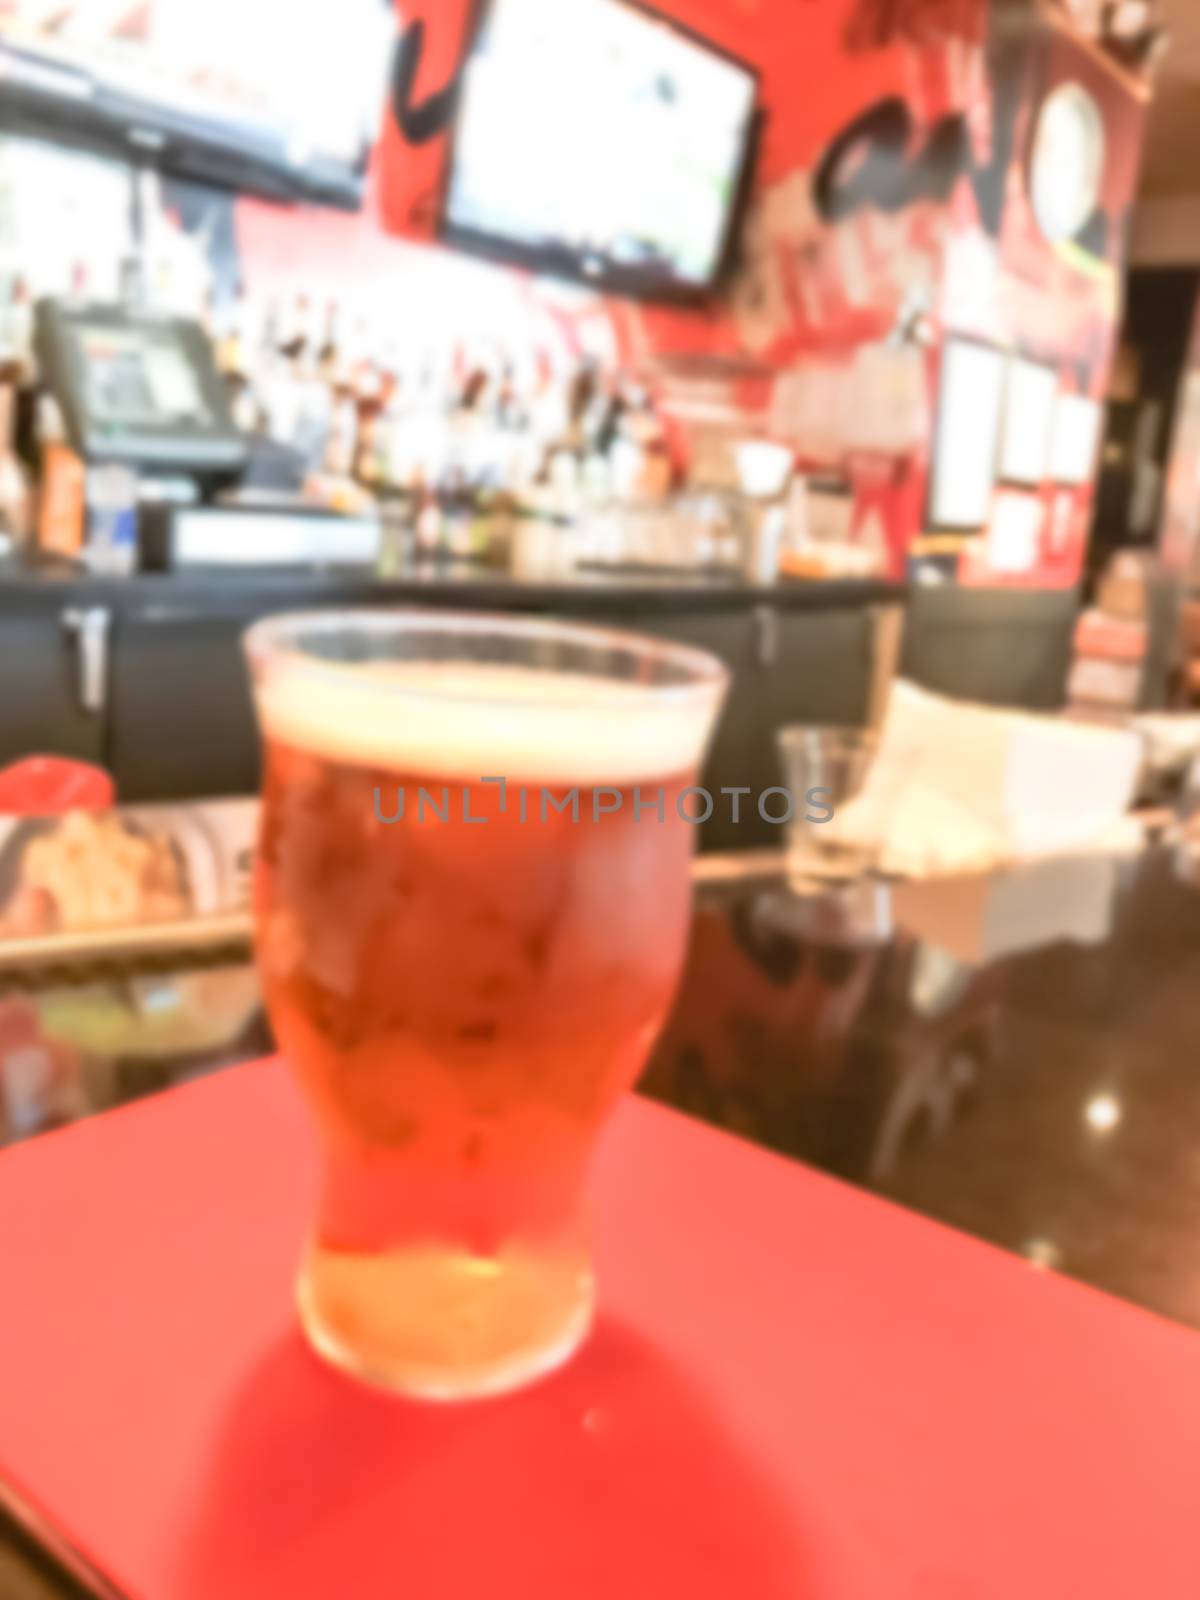 Blurry background beer mug and bar counter with many alcoholic drinks by trongnguyen